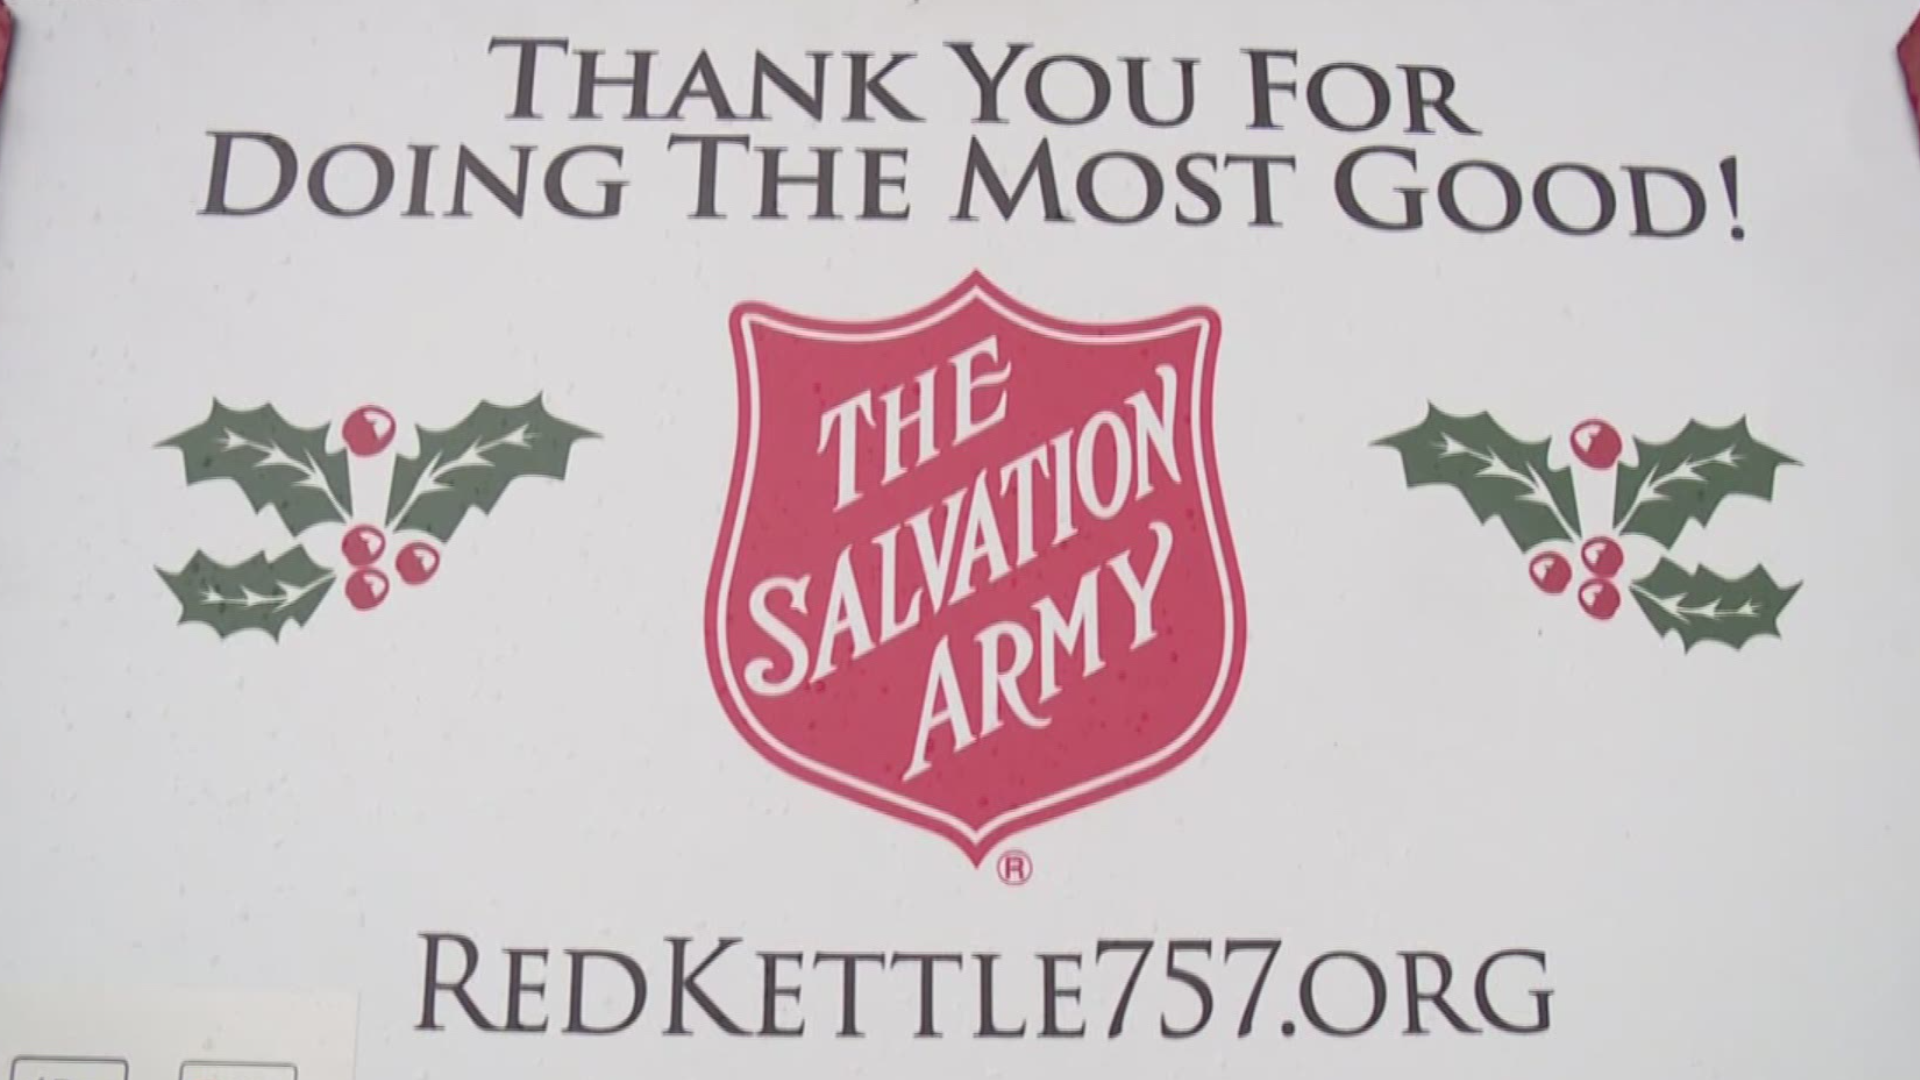 You no longer need cash to donate to the Salvation Army's Red Kettle program. You can hold your smartphone up to the sign and select how much you'd like to donate.